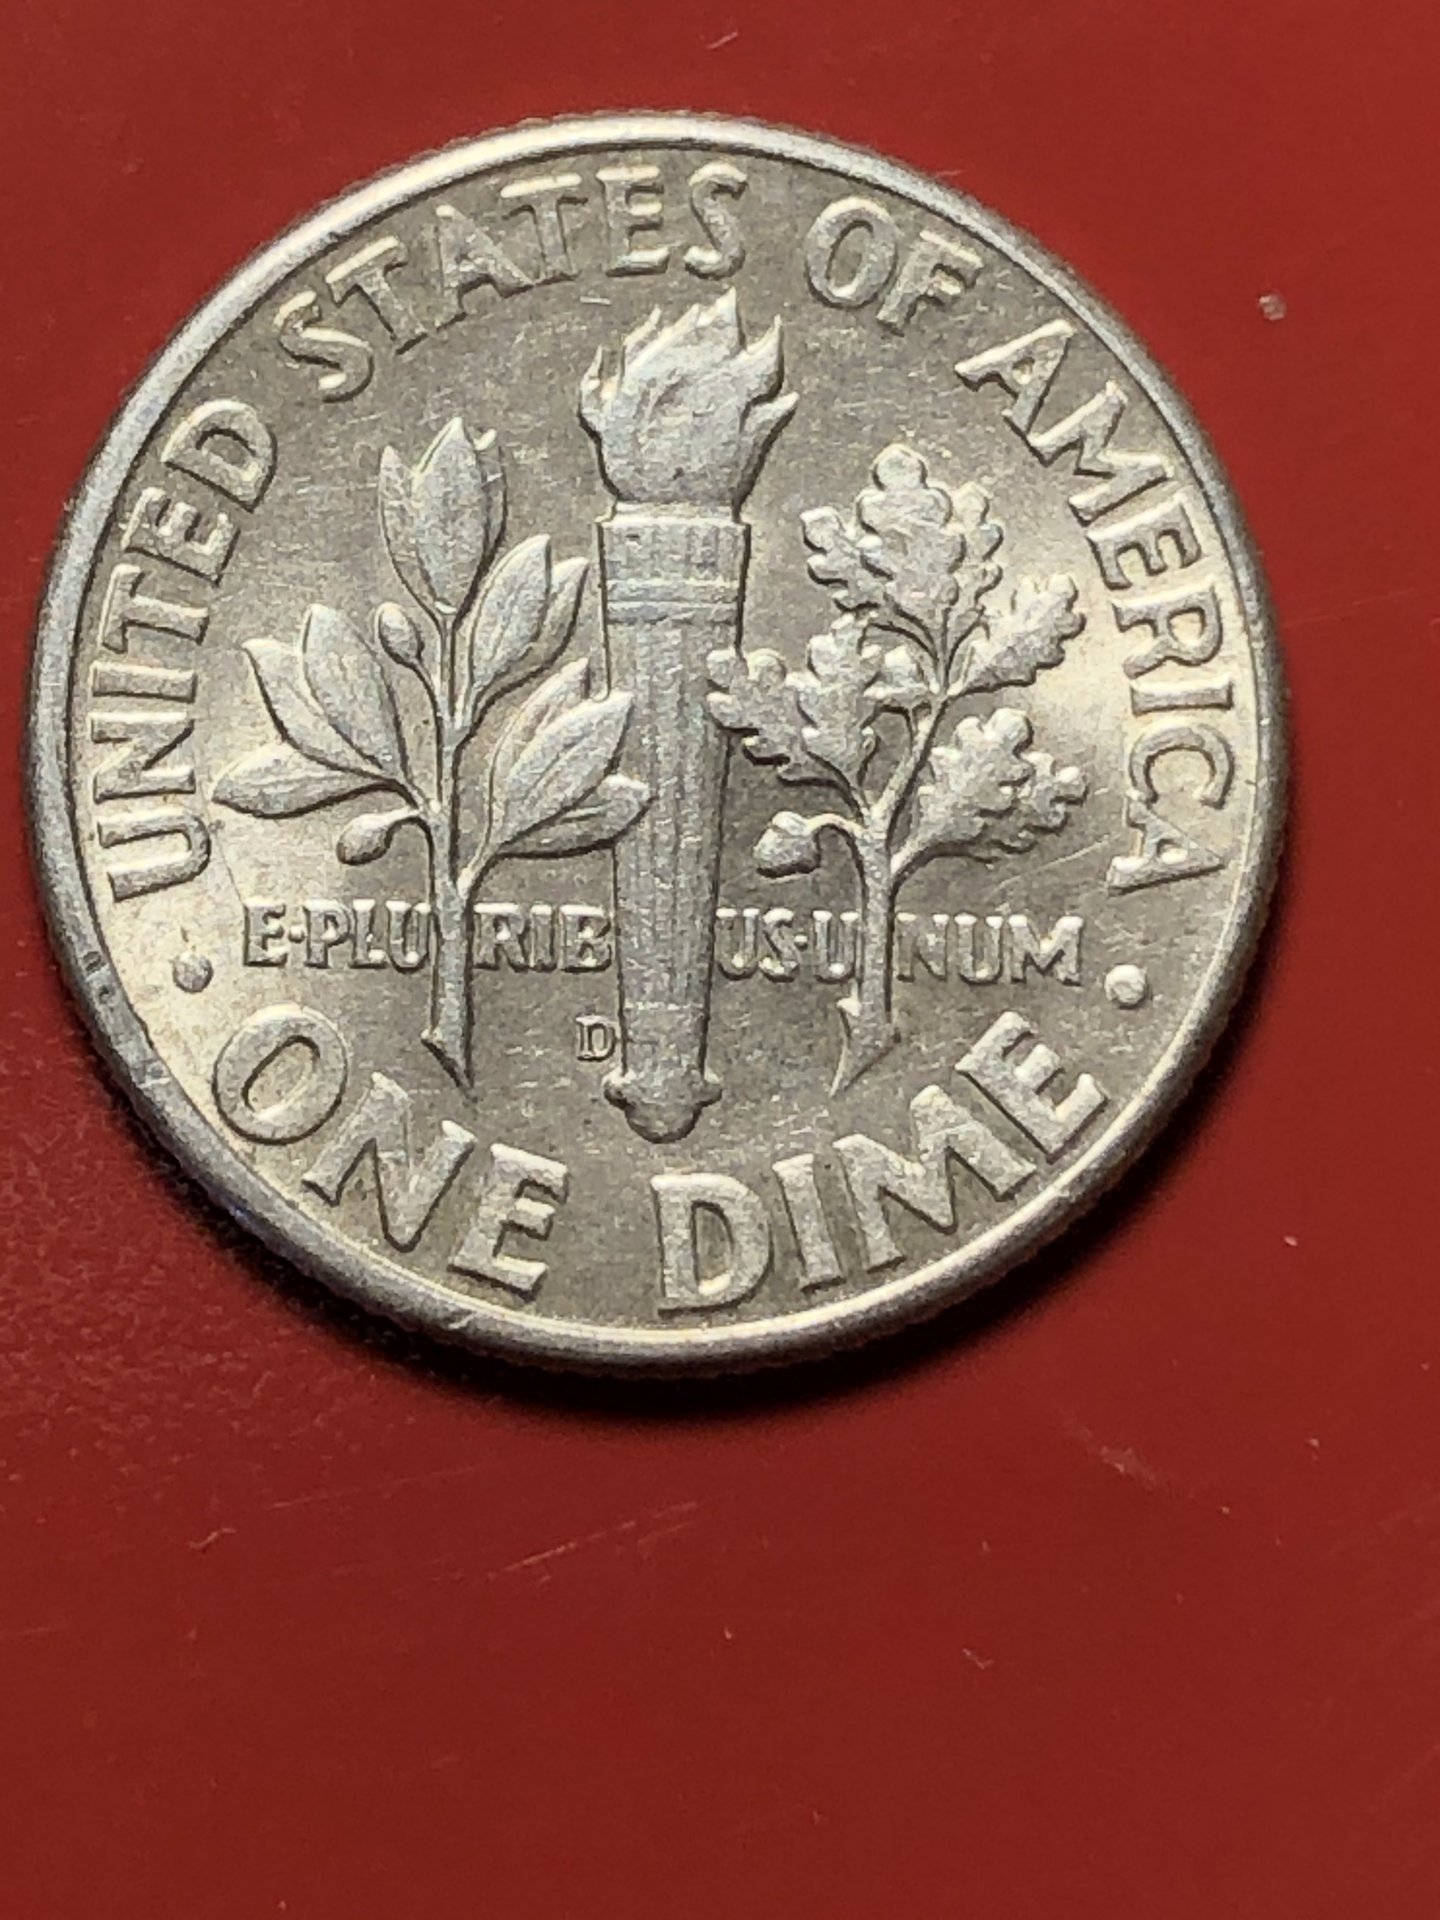 1964 D dime. Anything look good here? | Coin Talk